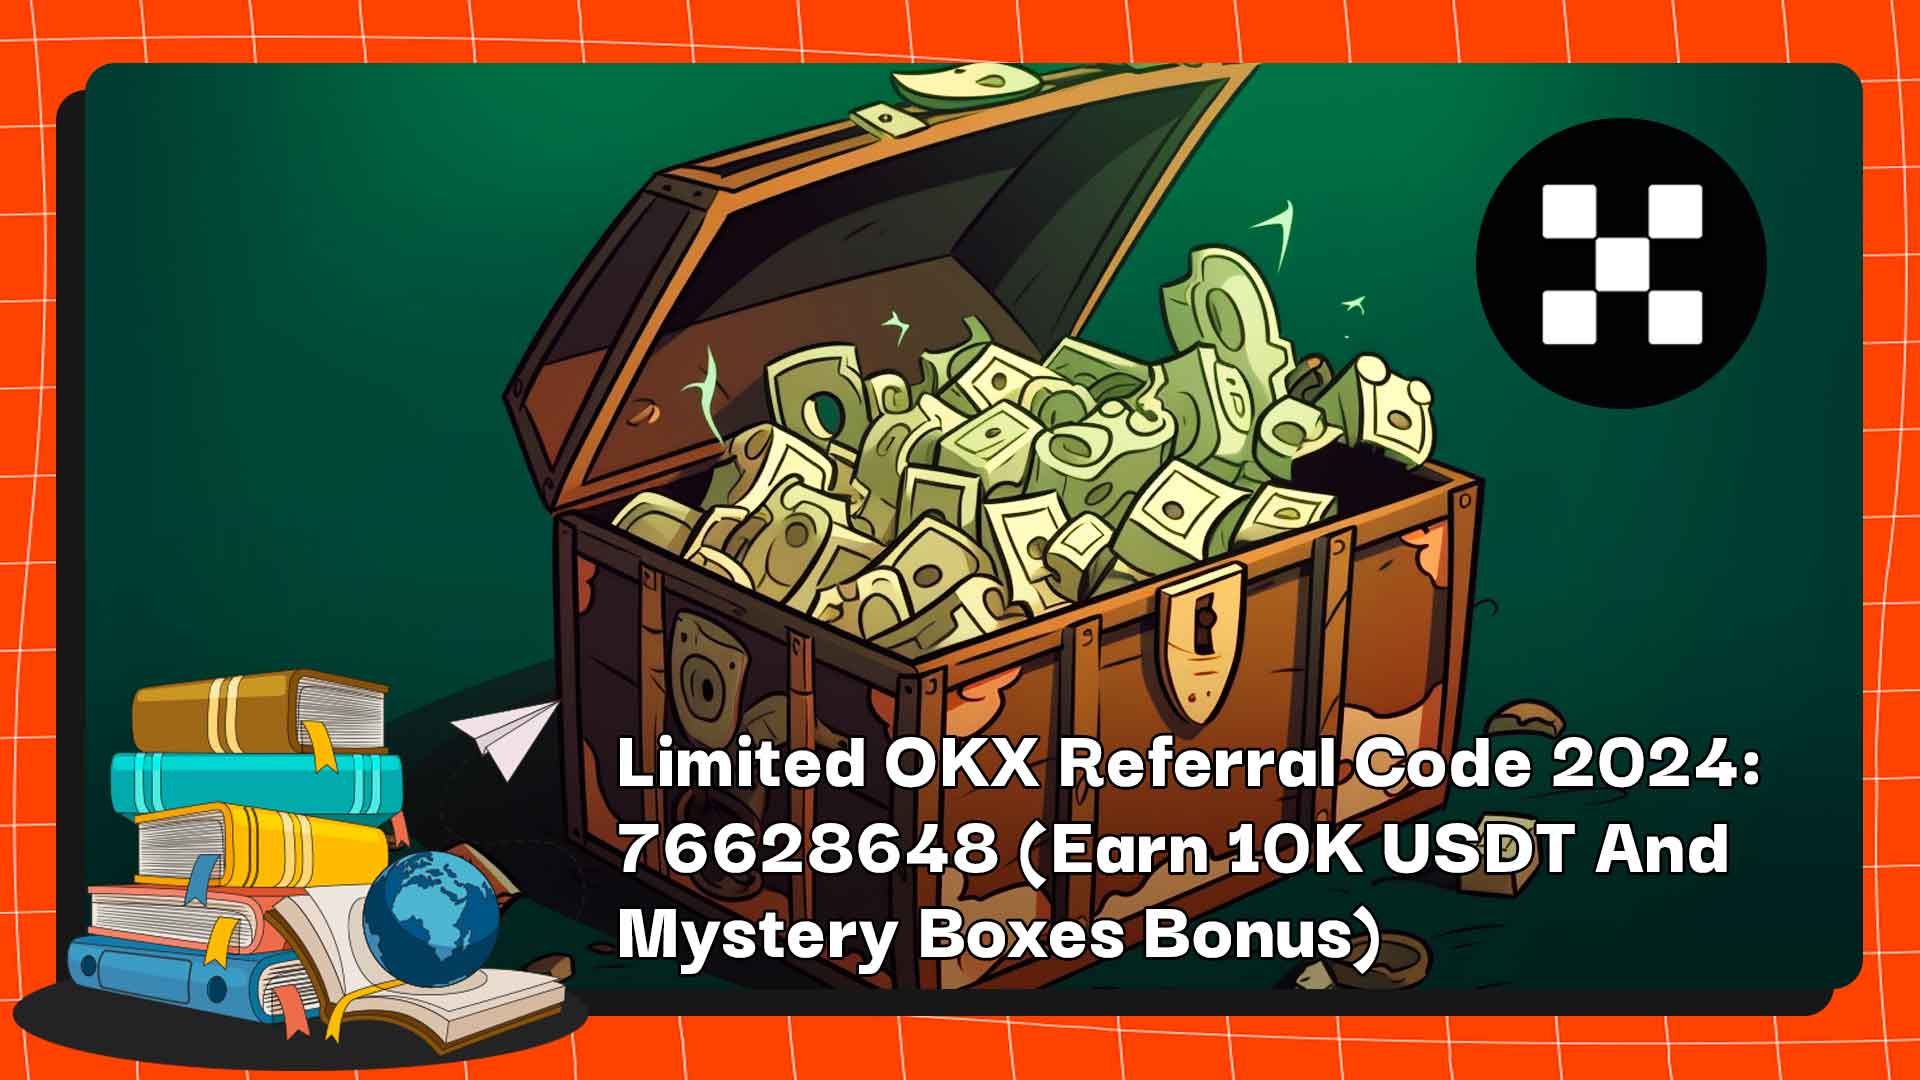 Limited OKX referral code 2024 is 59061816, sign up and earn up to 10K usdt and mystery boxes.